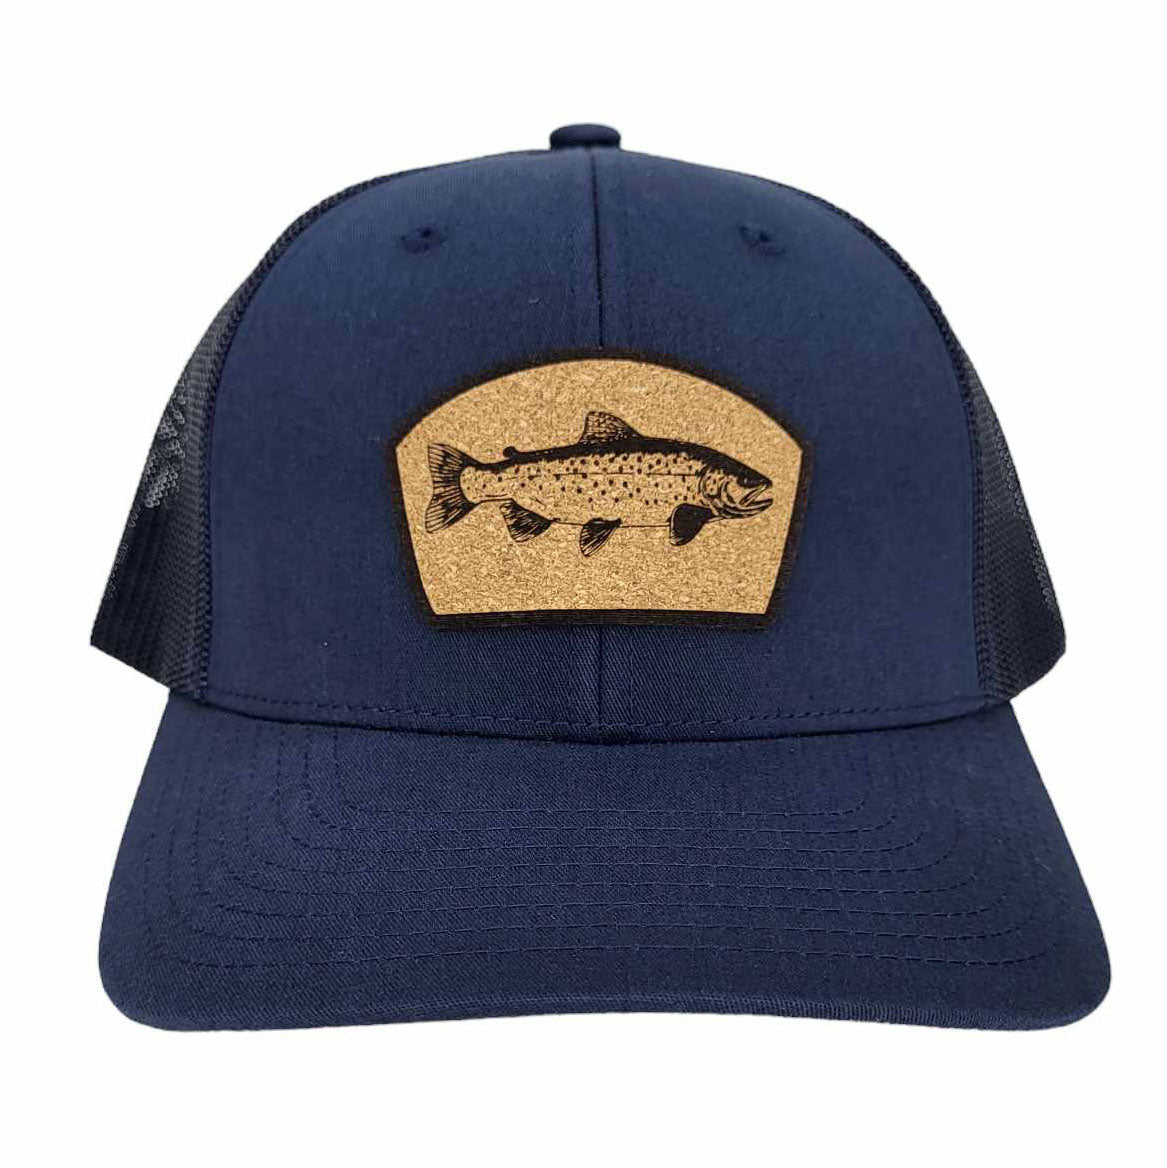 The Trout Fishing Hat